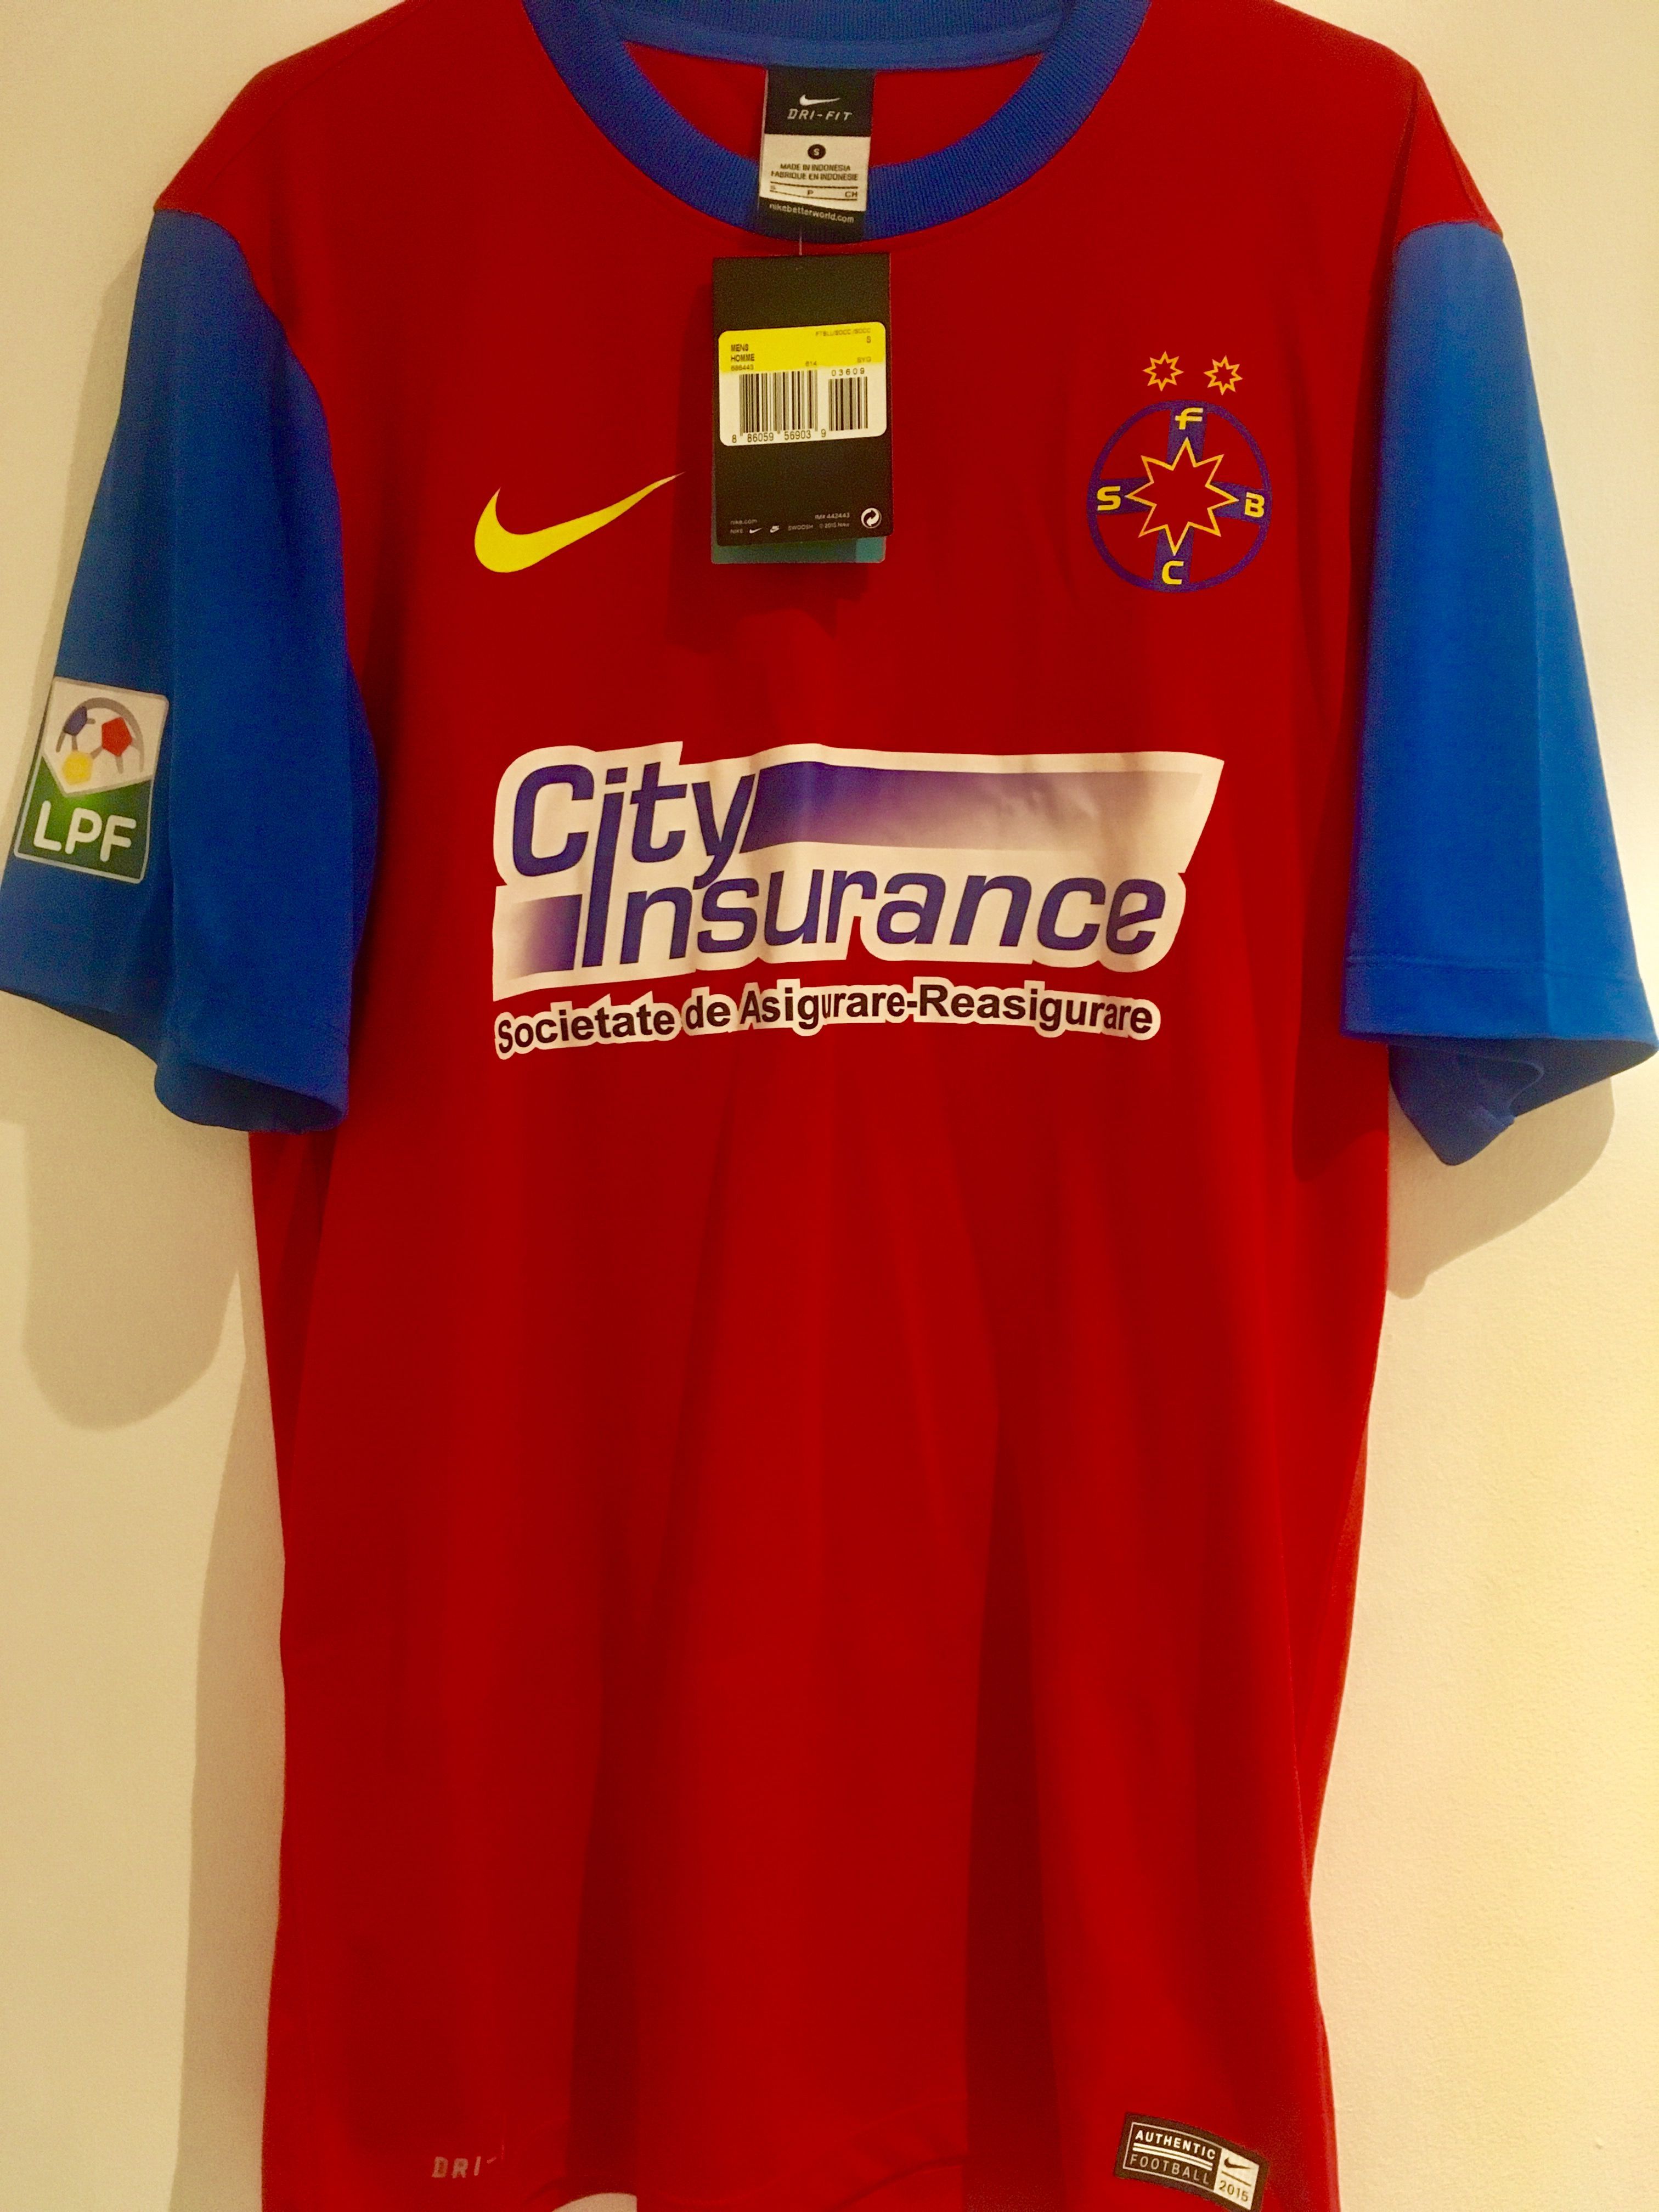 Uživatel na Twitteru: „'The shirt is a classic #Nike template, with the traditional #FCSteaua red body and blue sleeves.' #FCSB #SteauaBucuresti BNWT £94.99 S https://t.co/o0x7dqYEuc“ / Twitter